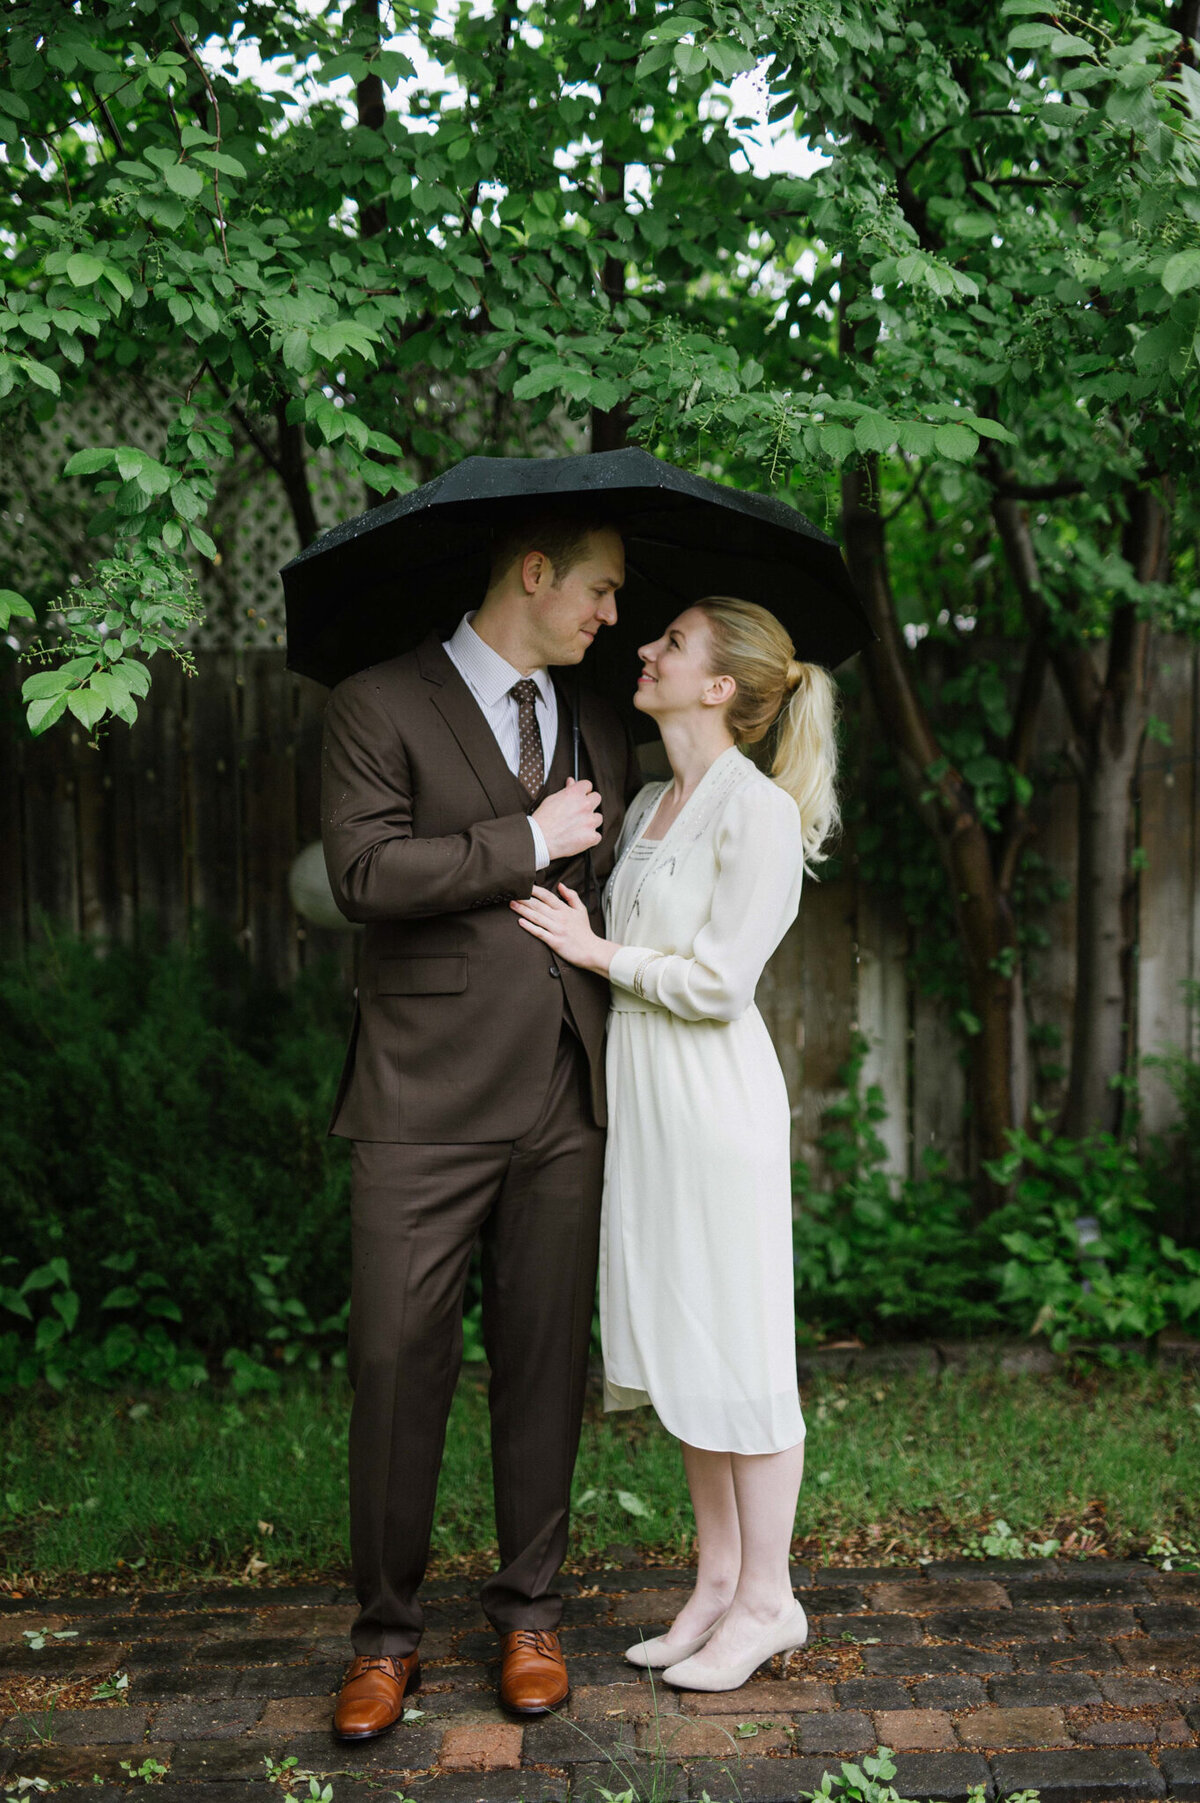 Vintage wedding inspiration, bride wearing antique knee length wedding outfit and heels, groom in a classic brown suit, couple holding umbrella against a tree backdrop, captured by Christy D. Swanberg Photography, editorial elopement and wedding photographer in Calgary, Alberta, featured on the Bronte Bride Vendor Guide.